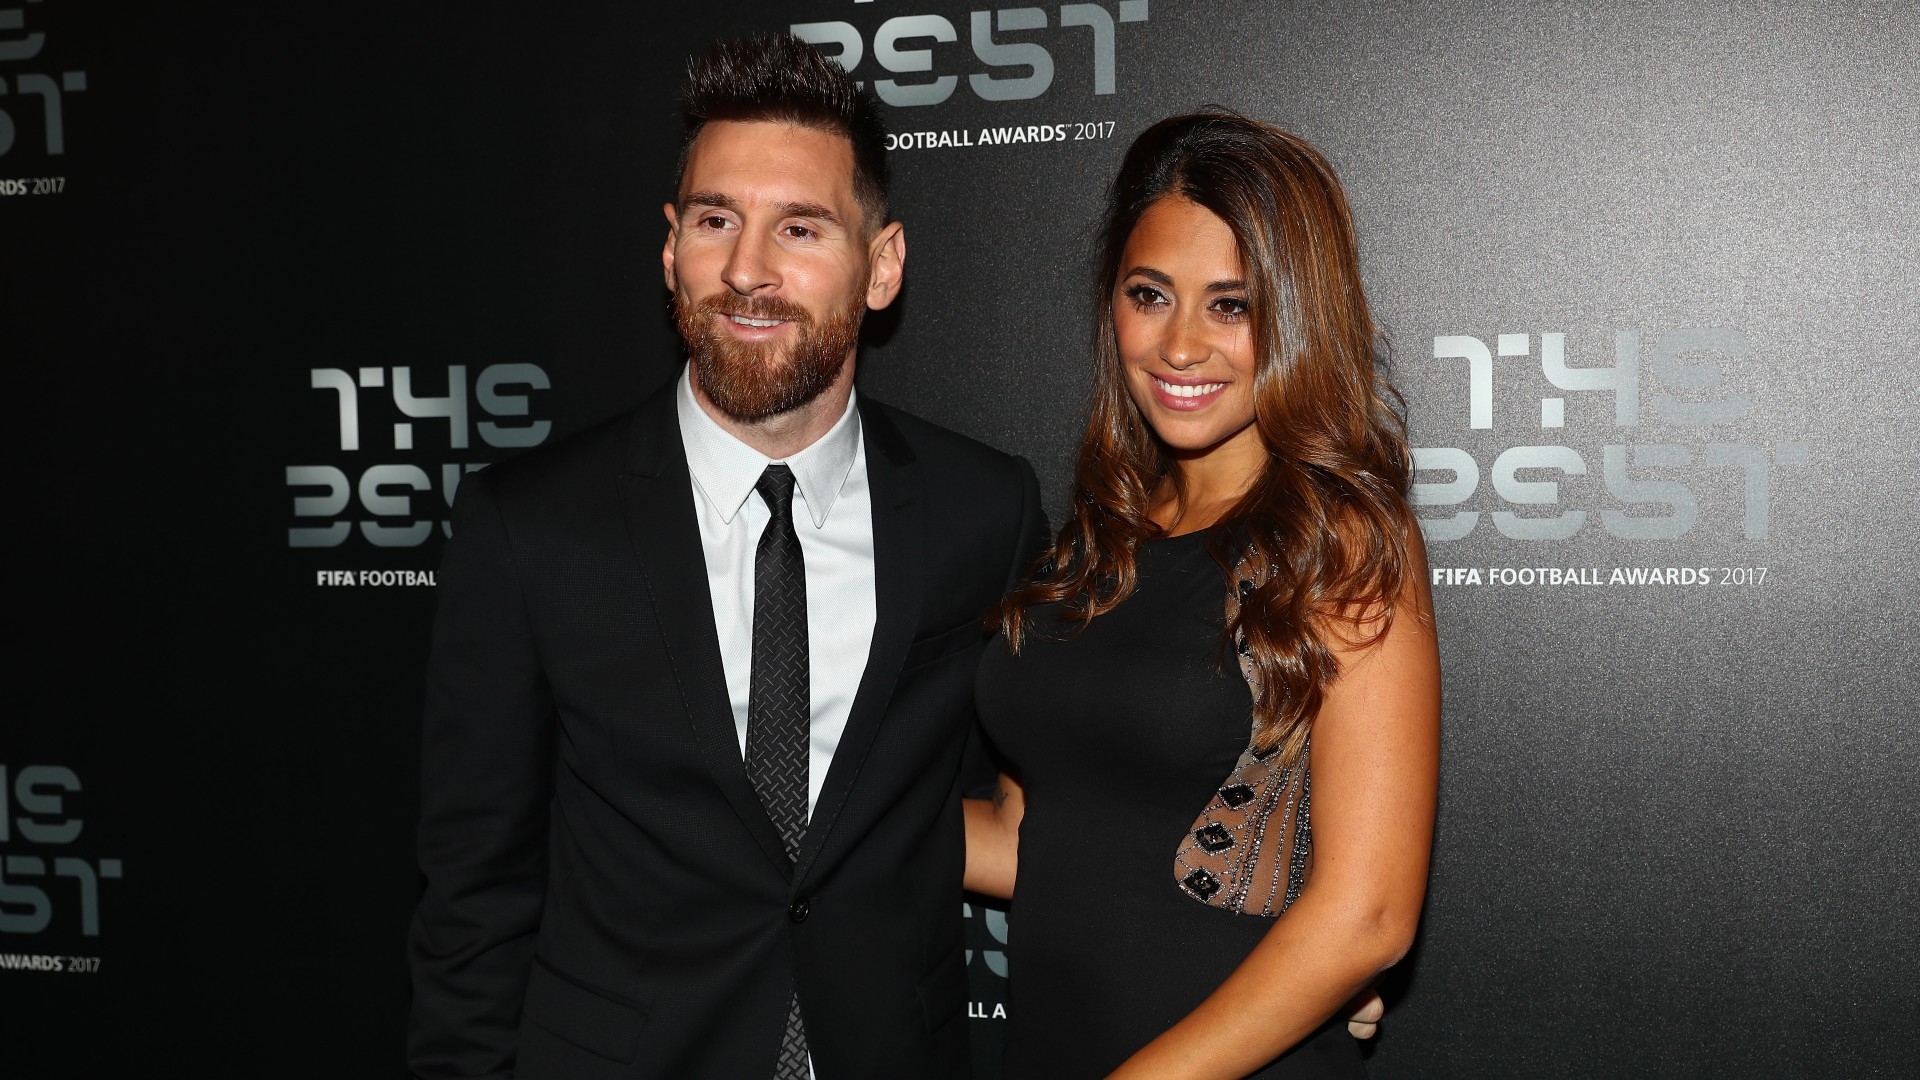 Who is Antonella Roccuzzo? Everything you need to know about Lionel Messi's wife